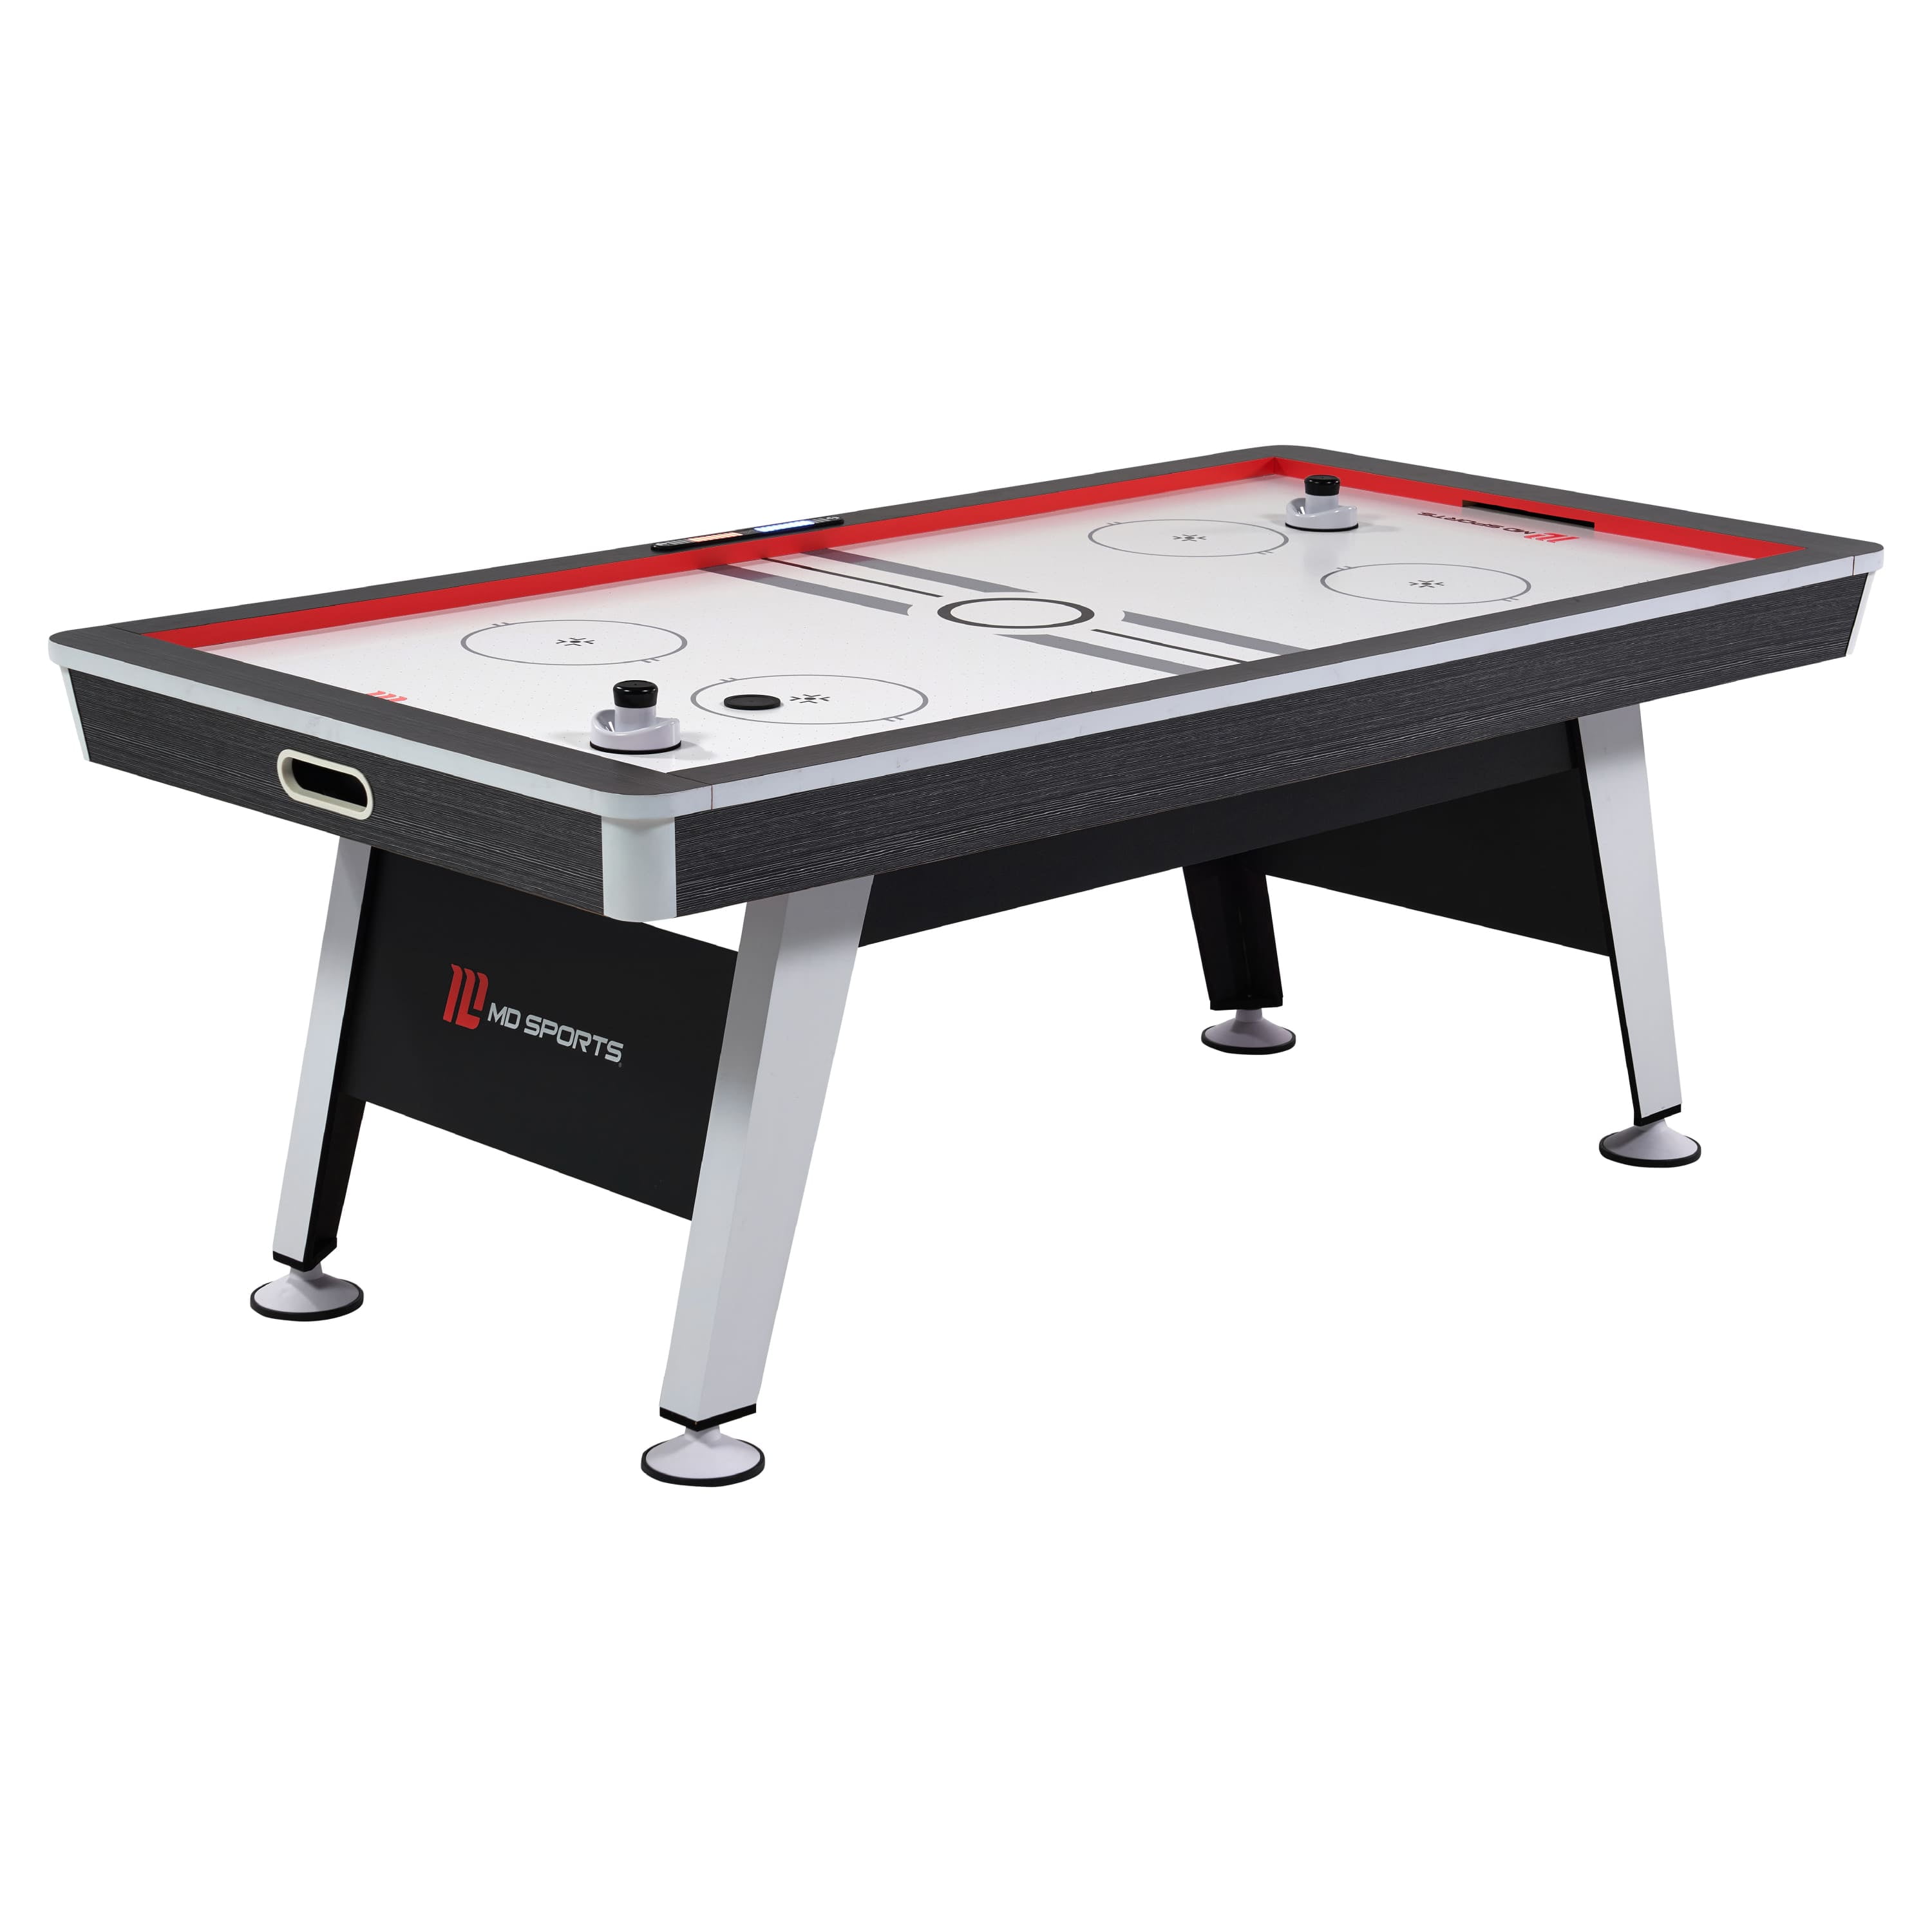 Triumph 45-6060W 54" LED Air Hockey Table with 2 Pucks for sale online 